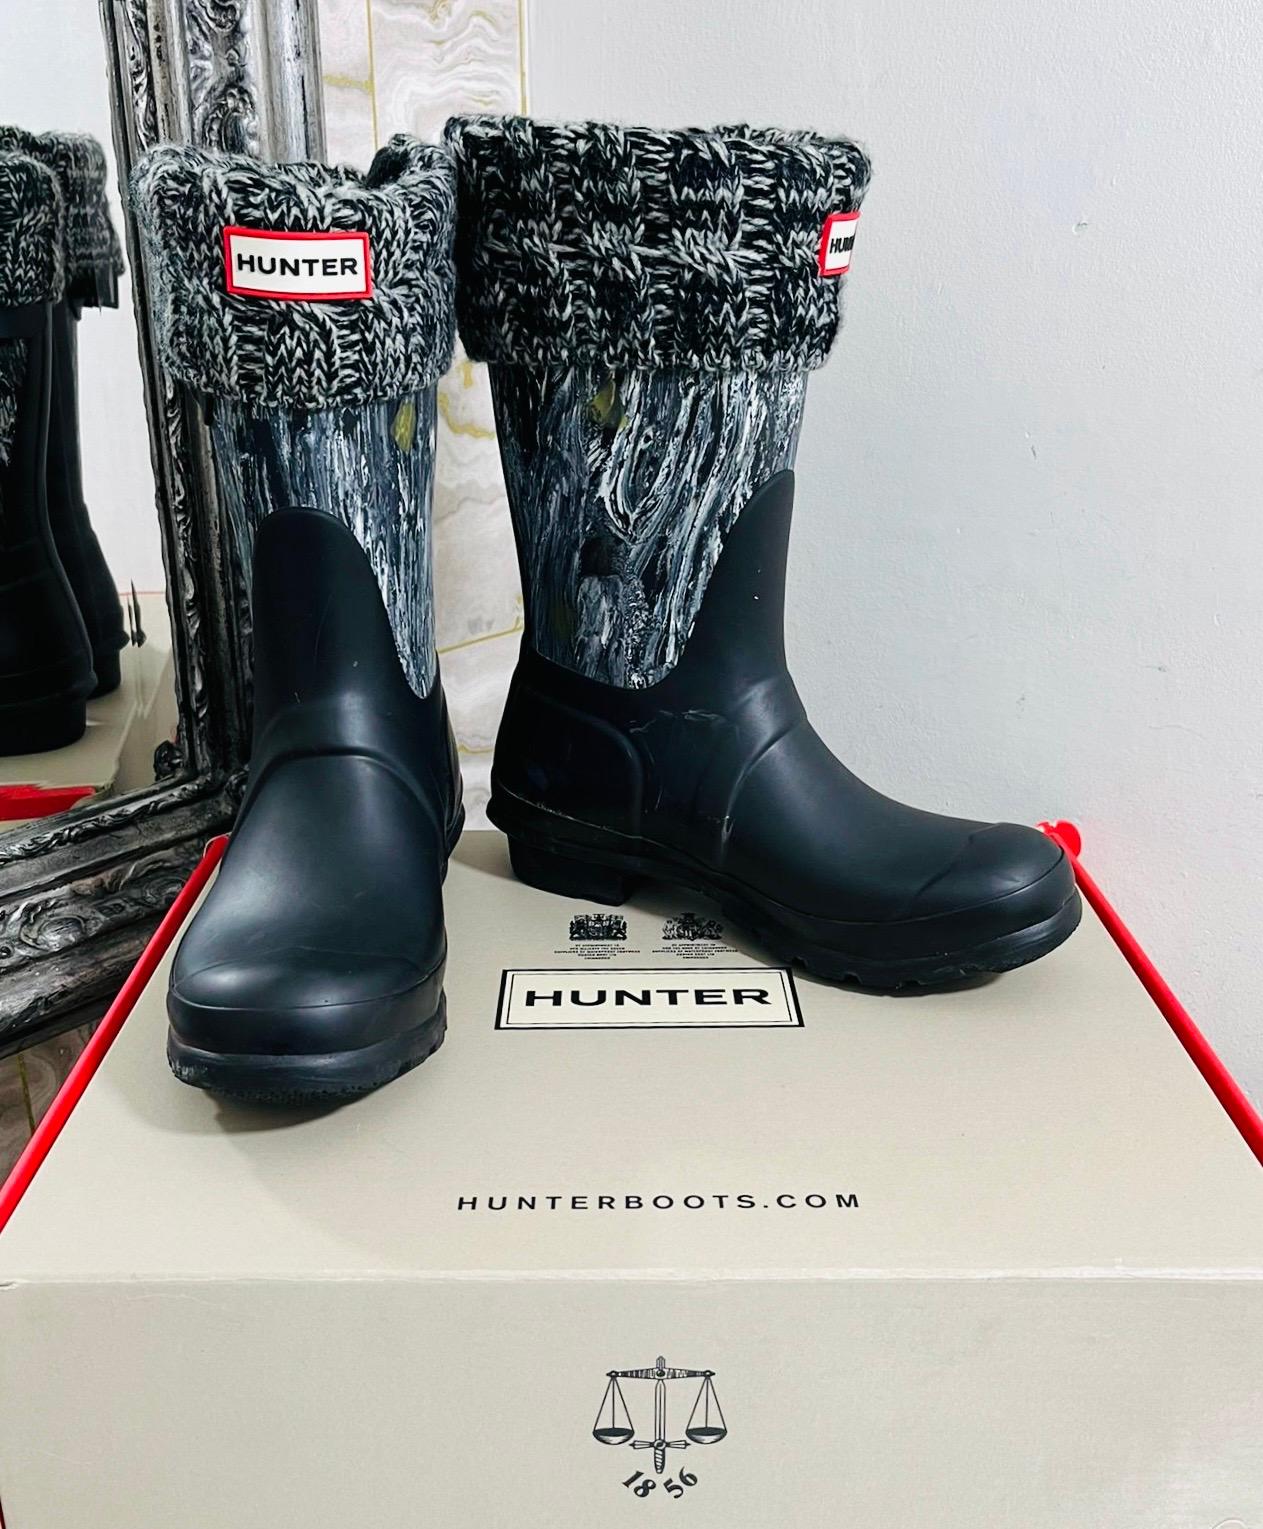 Hunter Original Short Marble Wellington Boots & Socks

Black waterproof boots crafted from natural rubber and designed with grey marble prints.

Featuring 'Hunter' logo to the front and buckle detail to the side.

The botts come with cosy knitted